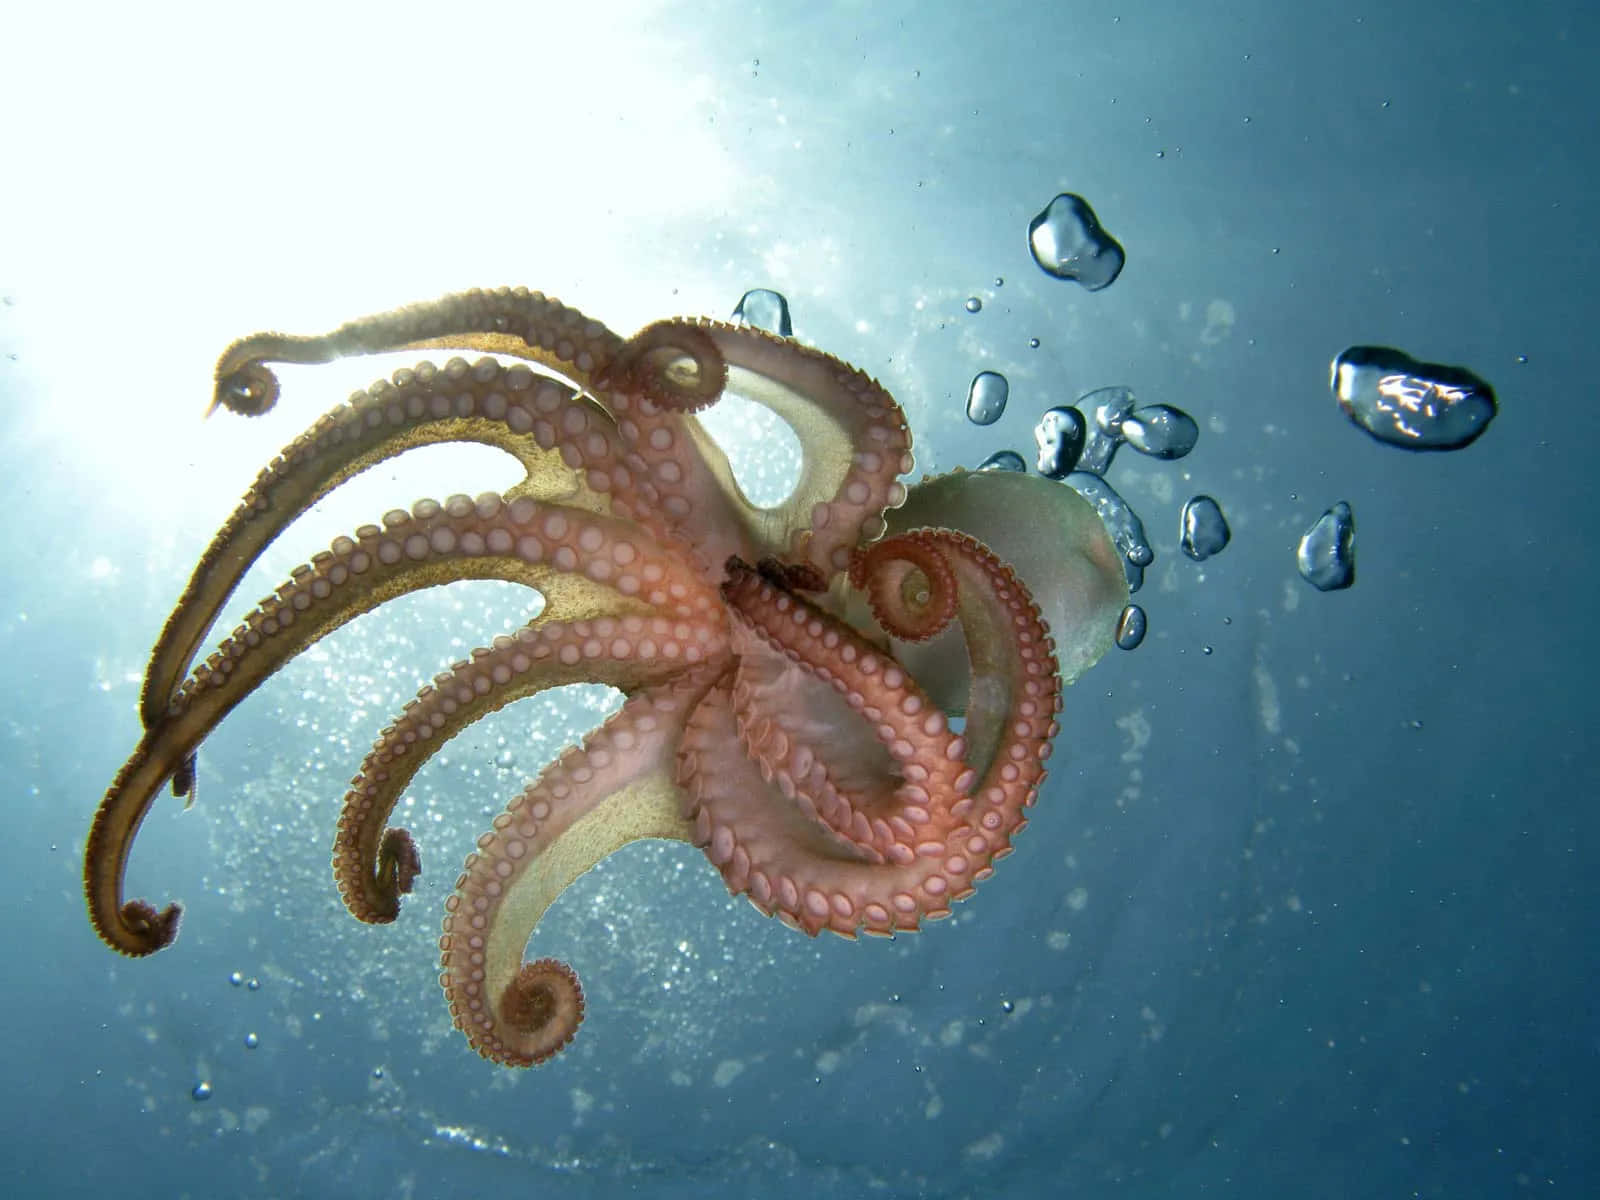 "The Colorful Magical World of Octopuses"